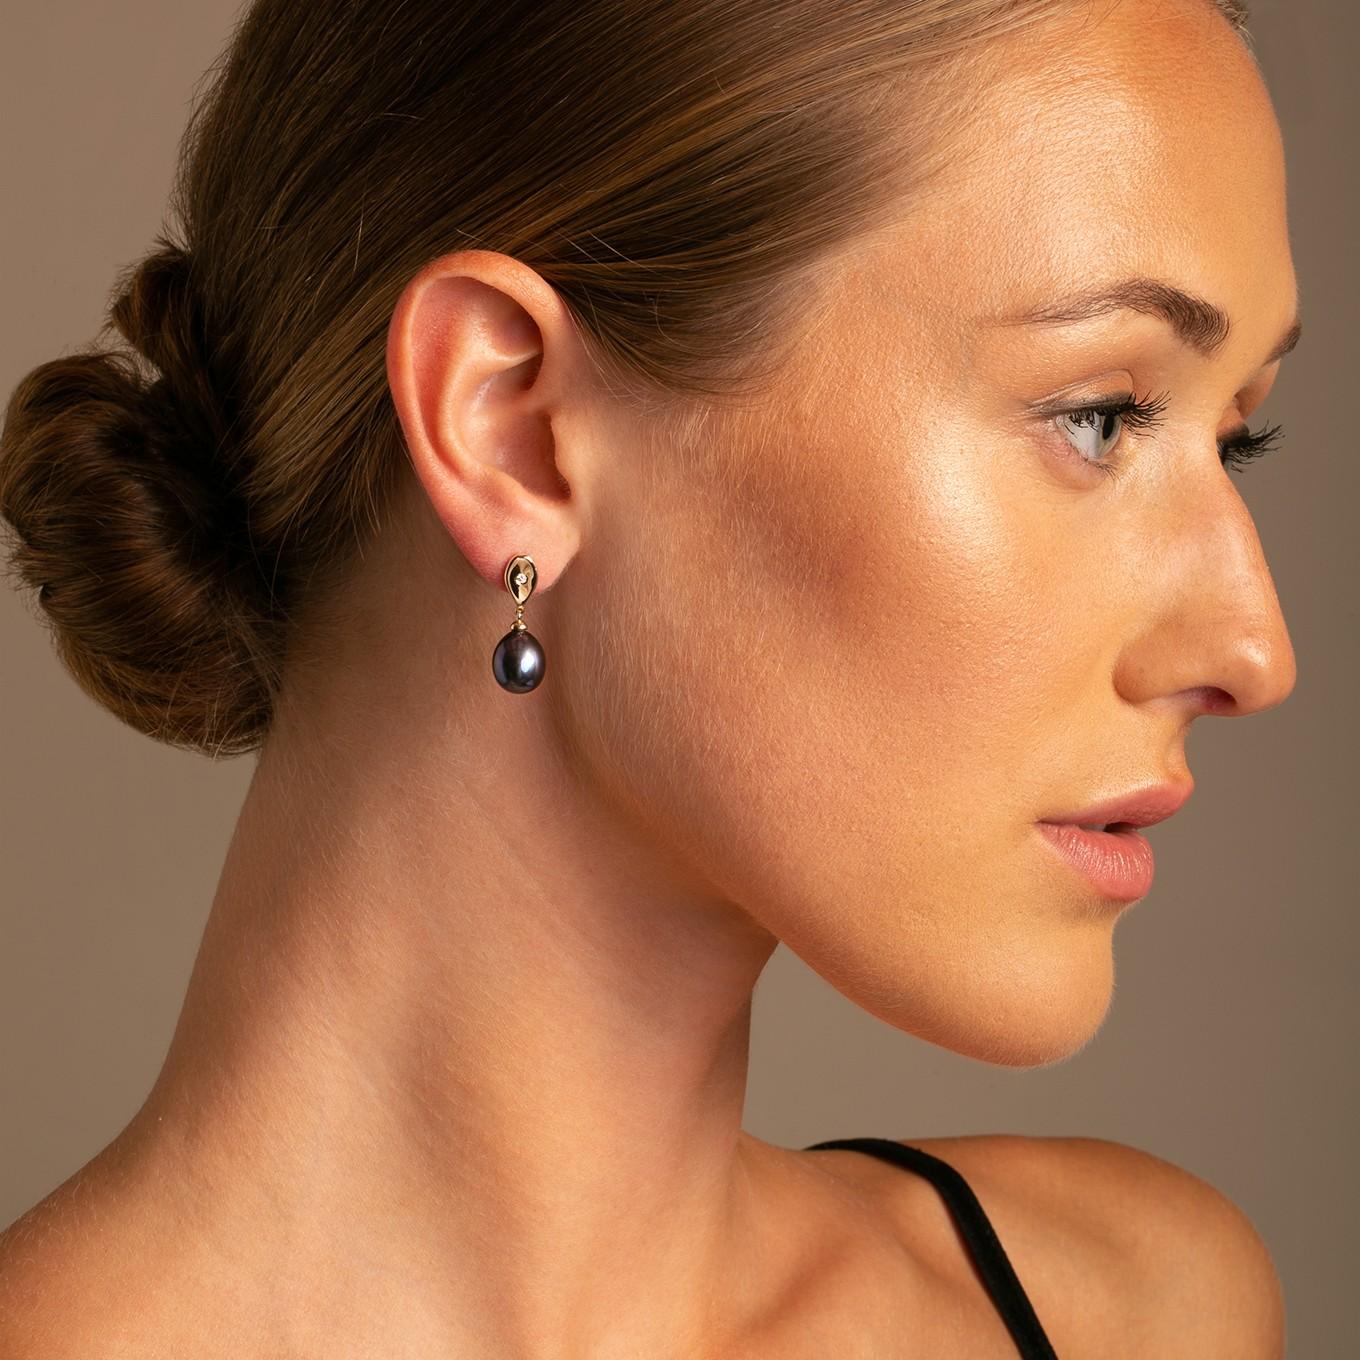 Introducing the 14K Yellow Gold Teardrop Diamond and Black Pearl Earrings, where timeless elegance meets a touch of modern flair.

Each earring is beautifully crafted with a classic 14K yellow gold teardrop design, enhanced by a sparkling diamond